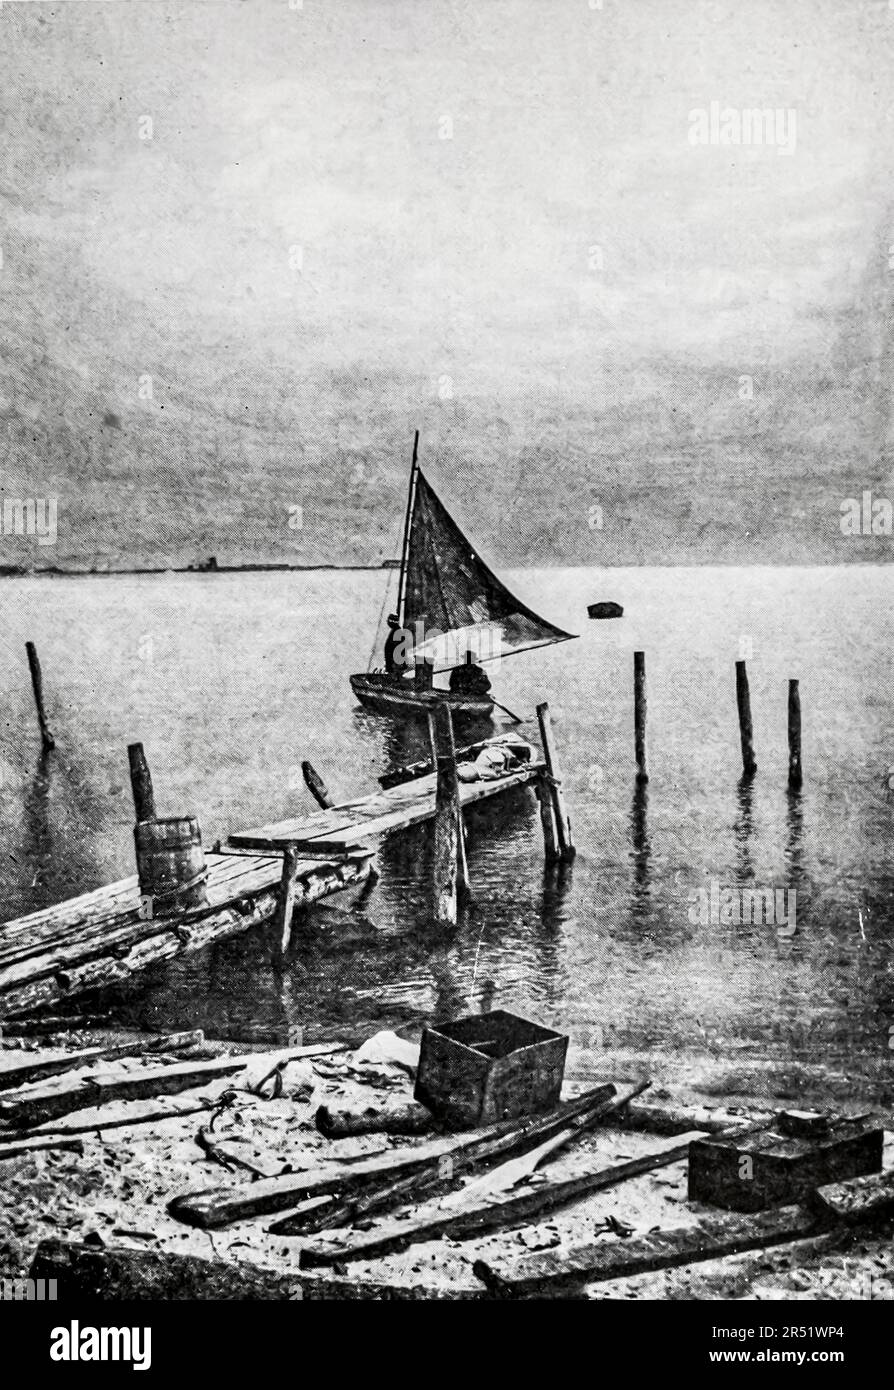 Starting for the Fishing Grounds The Straits of Mackinac, black and white photography by Clifton Johnson, from the book ' Highways and byways of the Great Lakes ' Publication date 1911 Publisher New York, The Macmillan company; London, Macmillan and co., ltd. Stock Photo